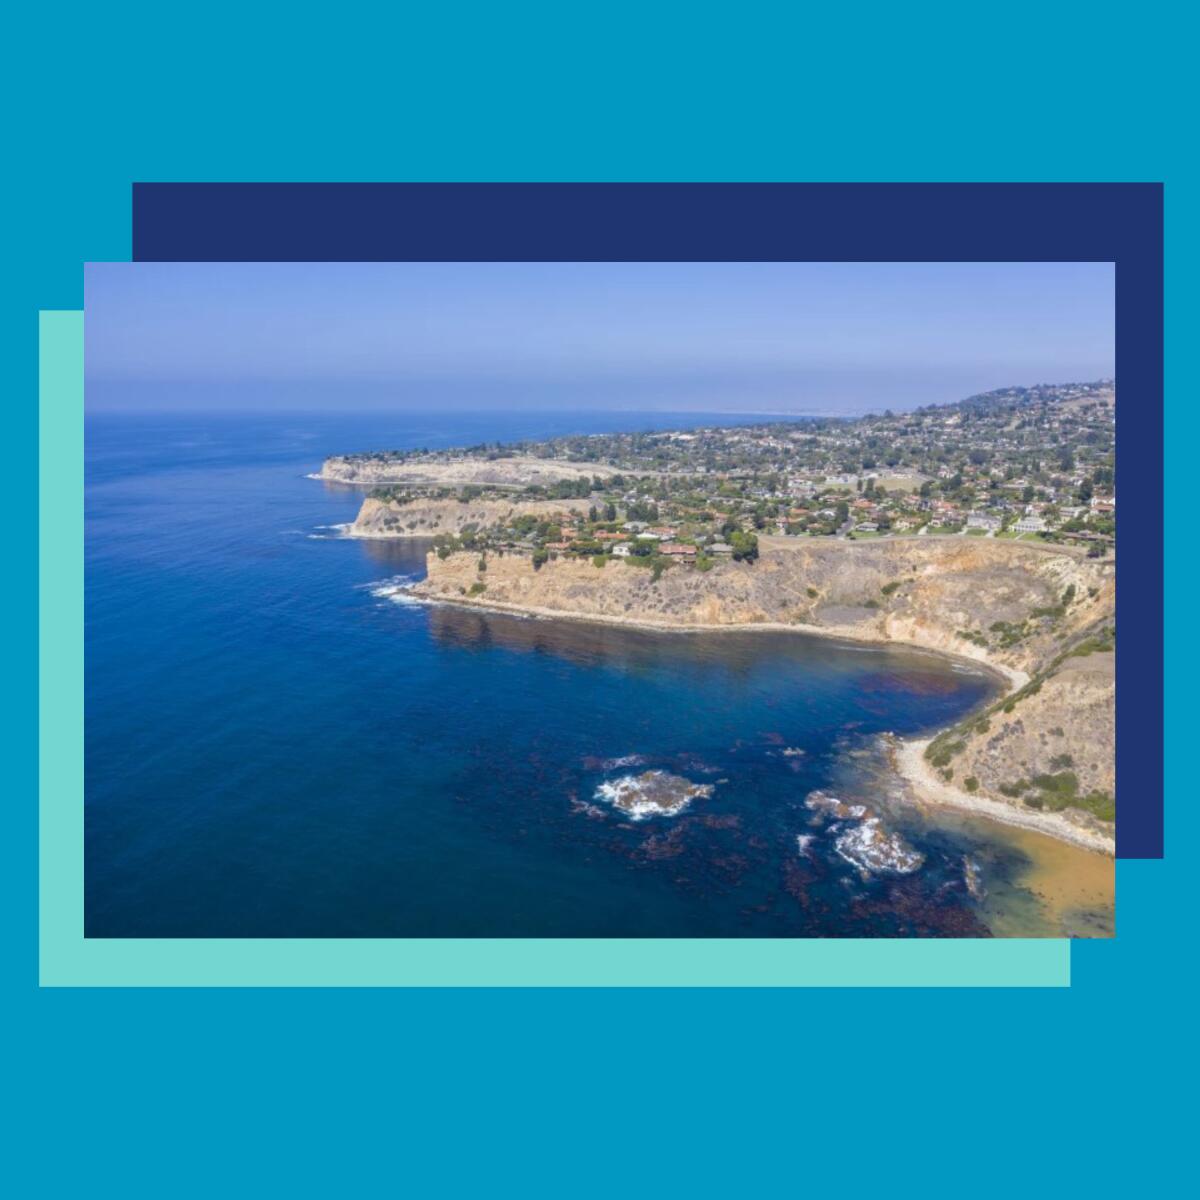 View of the Palos Verdes Peninsula from a height.